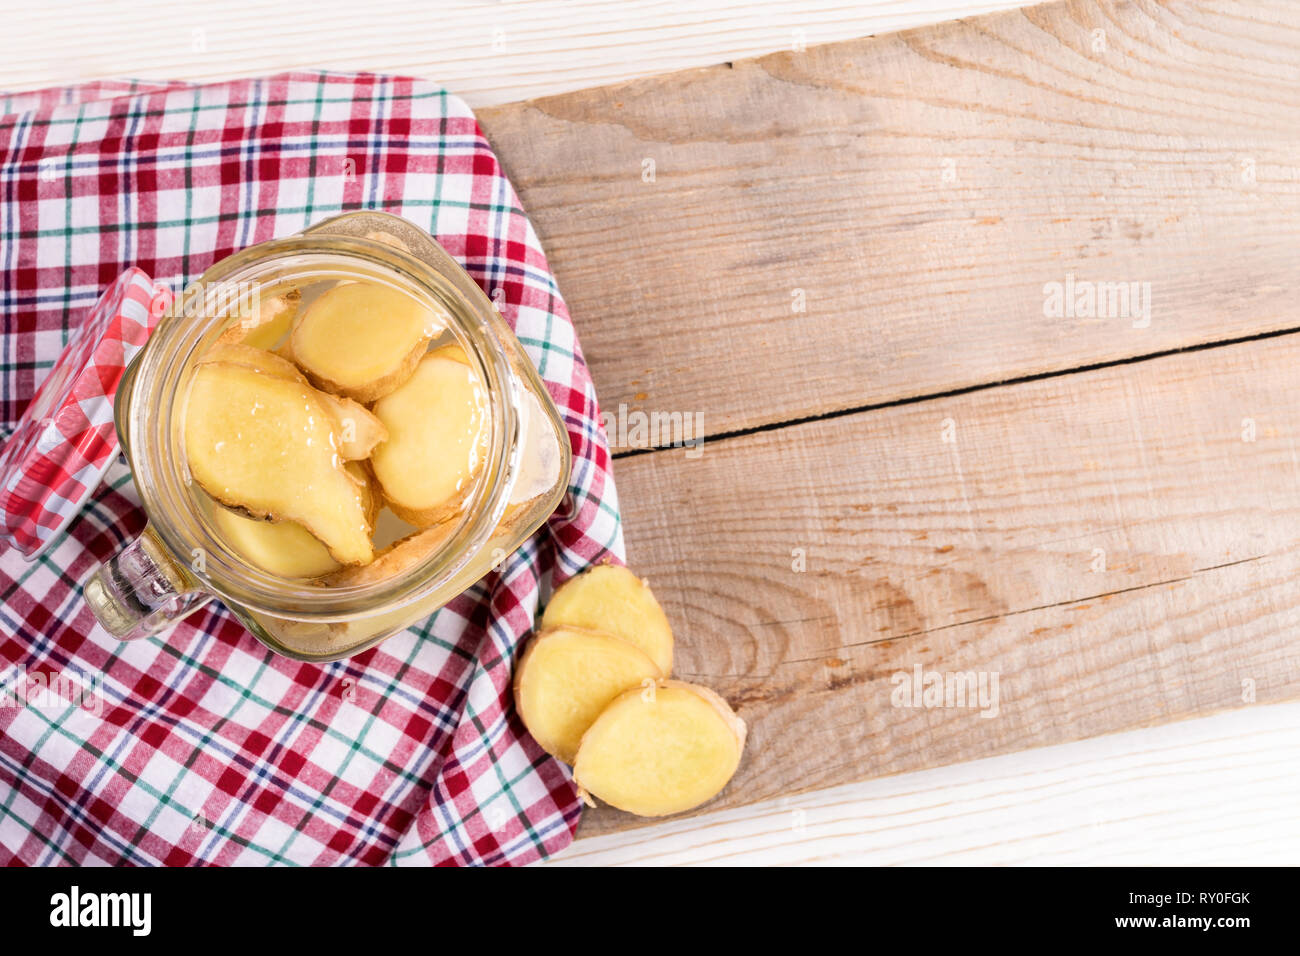 Opened glass jar with ginger water on red tartan cloth on diagonal wooden boards.  Stock Photo